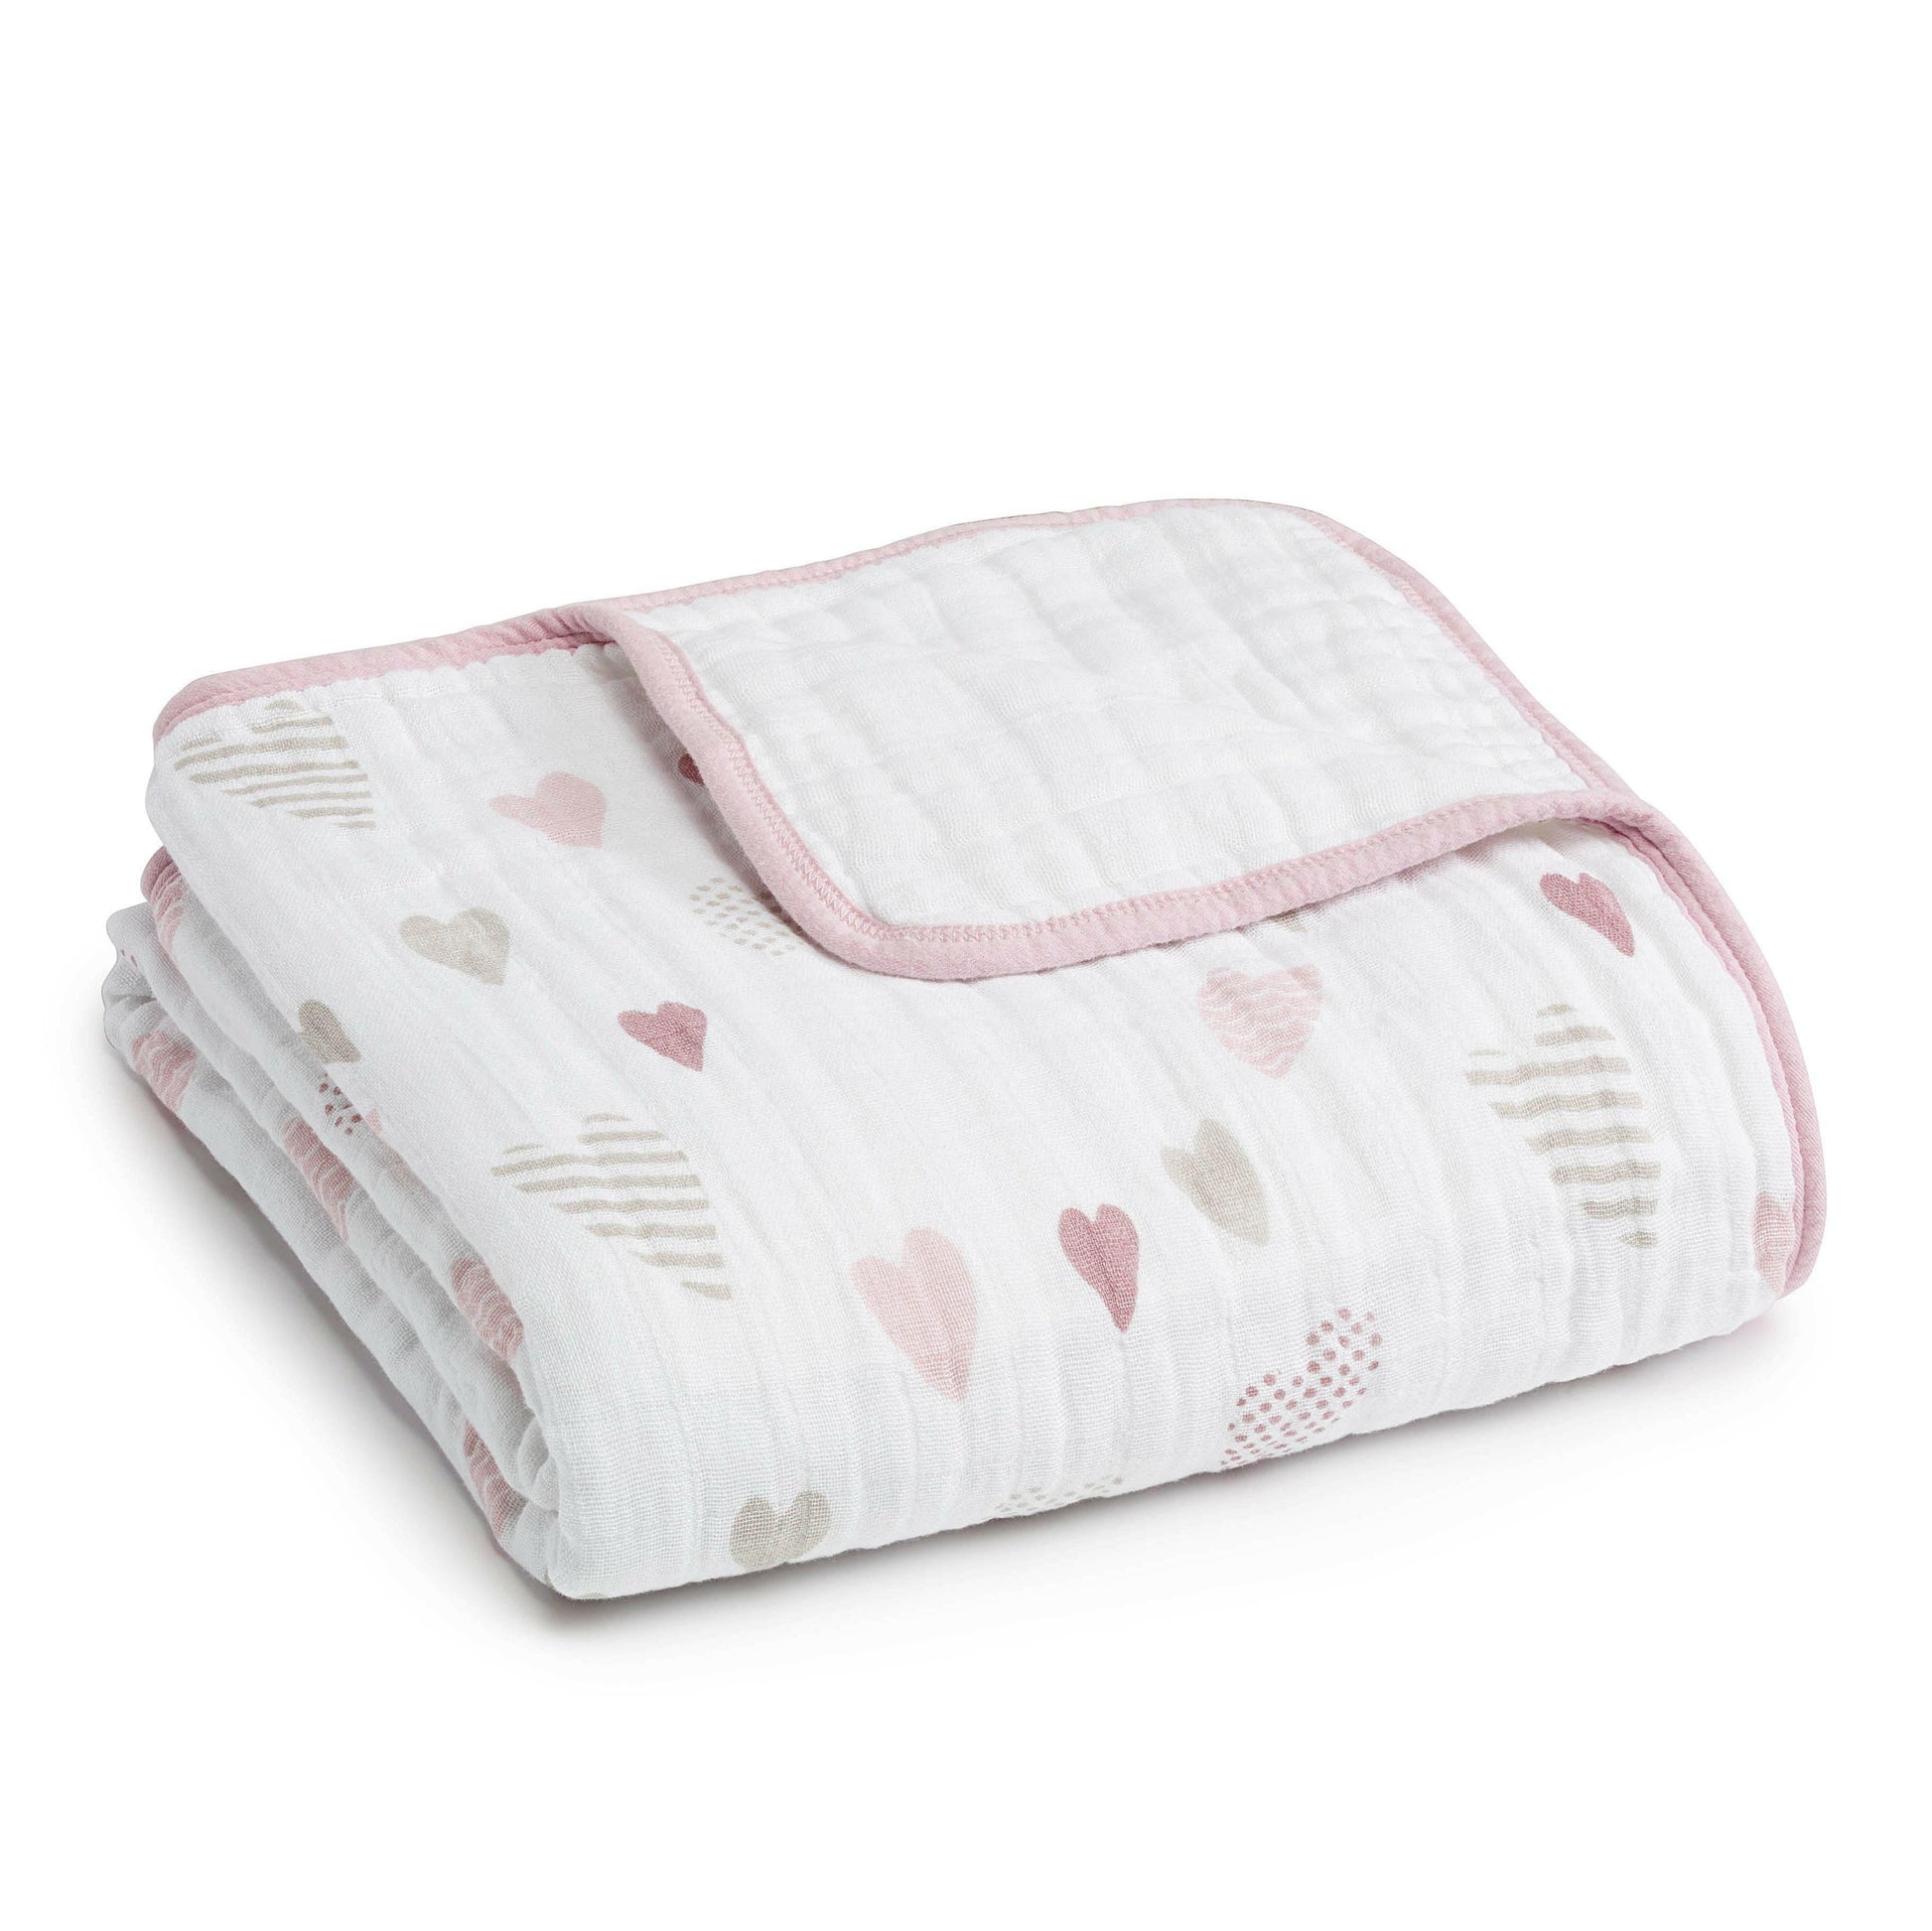 Aden and Anais Classic Dream Blanket - Heart Breaker - Traveling Tikes 